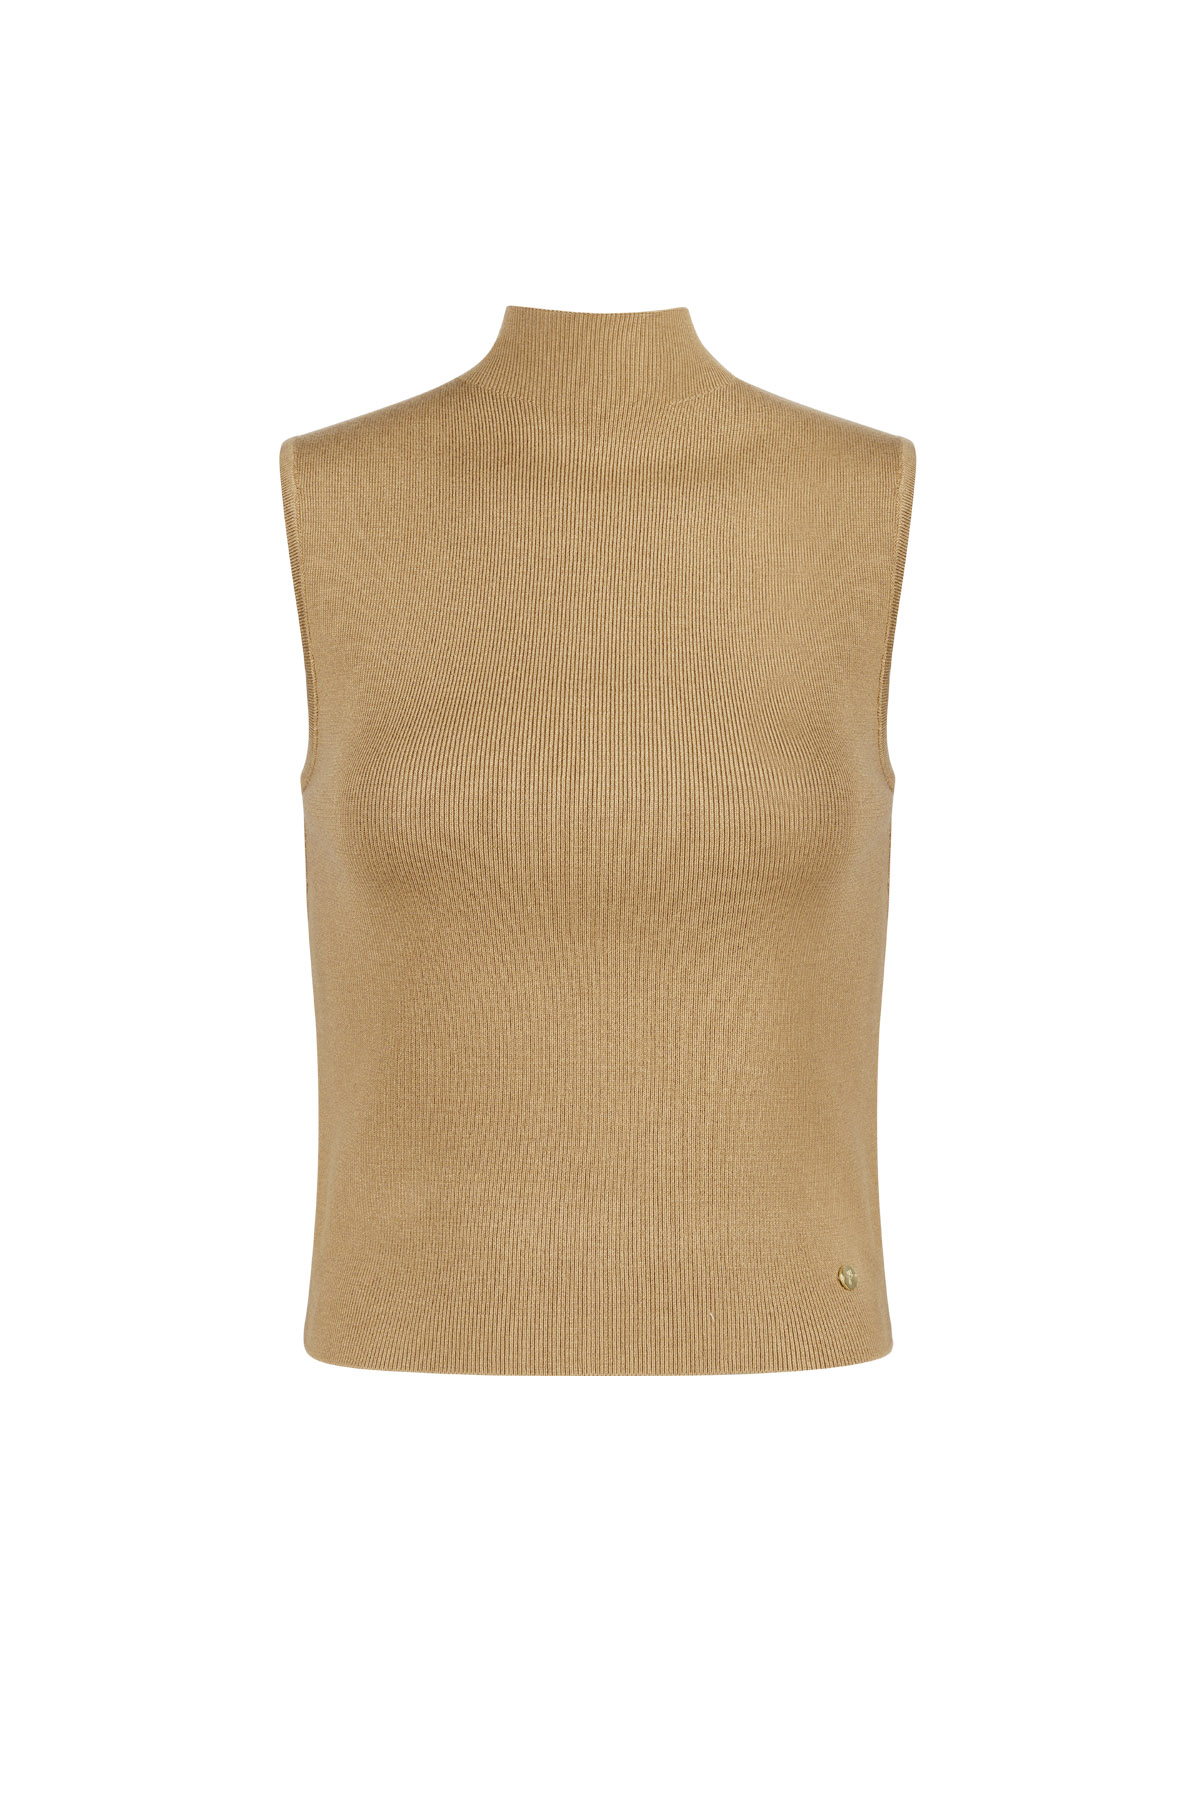 Sleeveless top with low turtleneck large/extra large – brown 